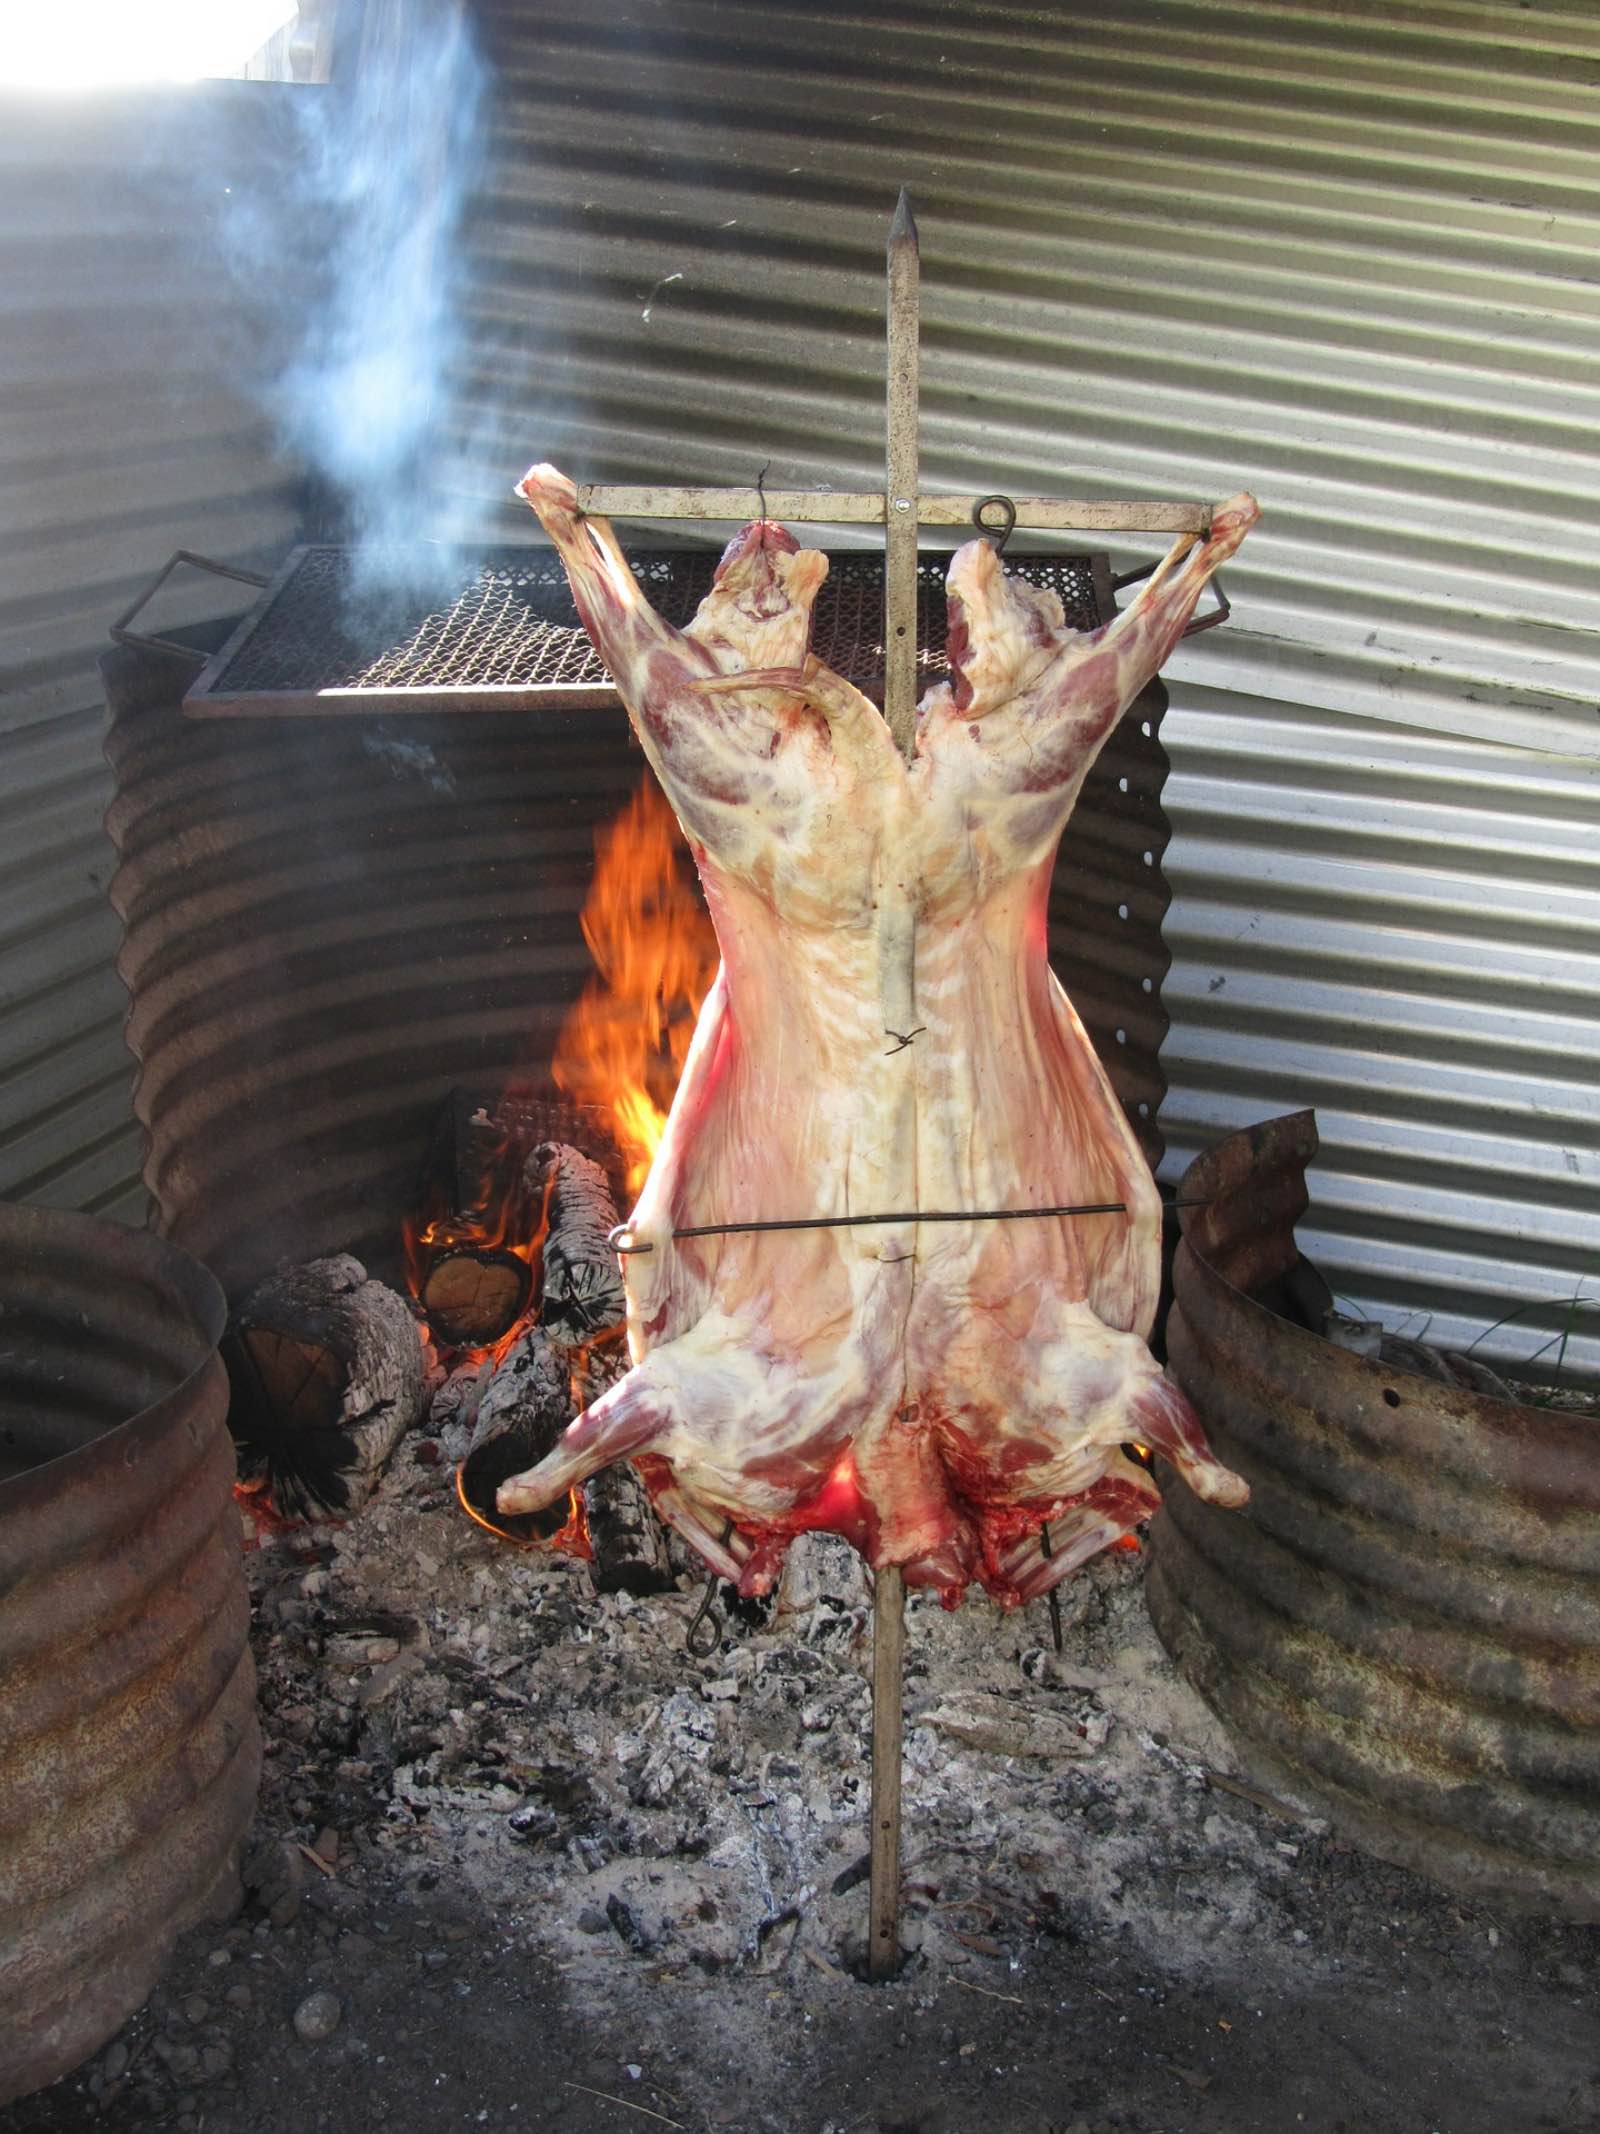 Patagonian barbecue is traditionally a sheep on a rotisserie turning next to hot coals. One for the carnivores!